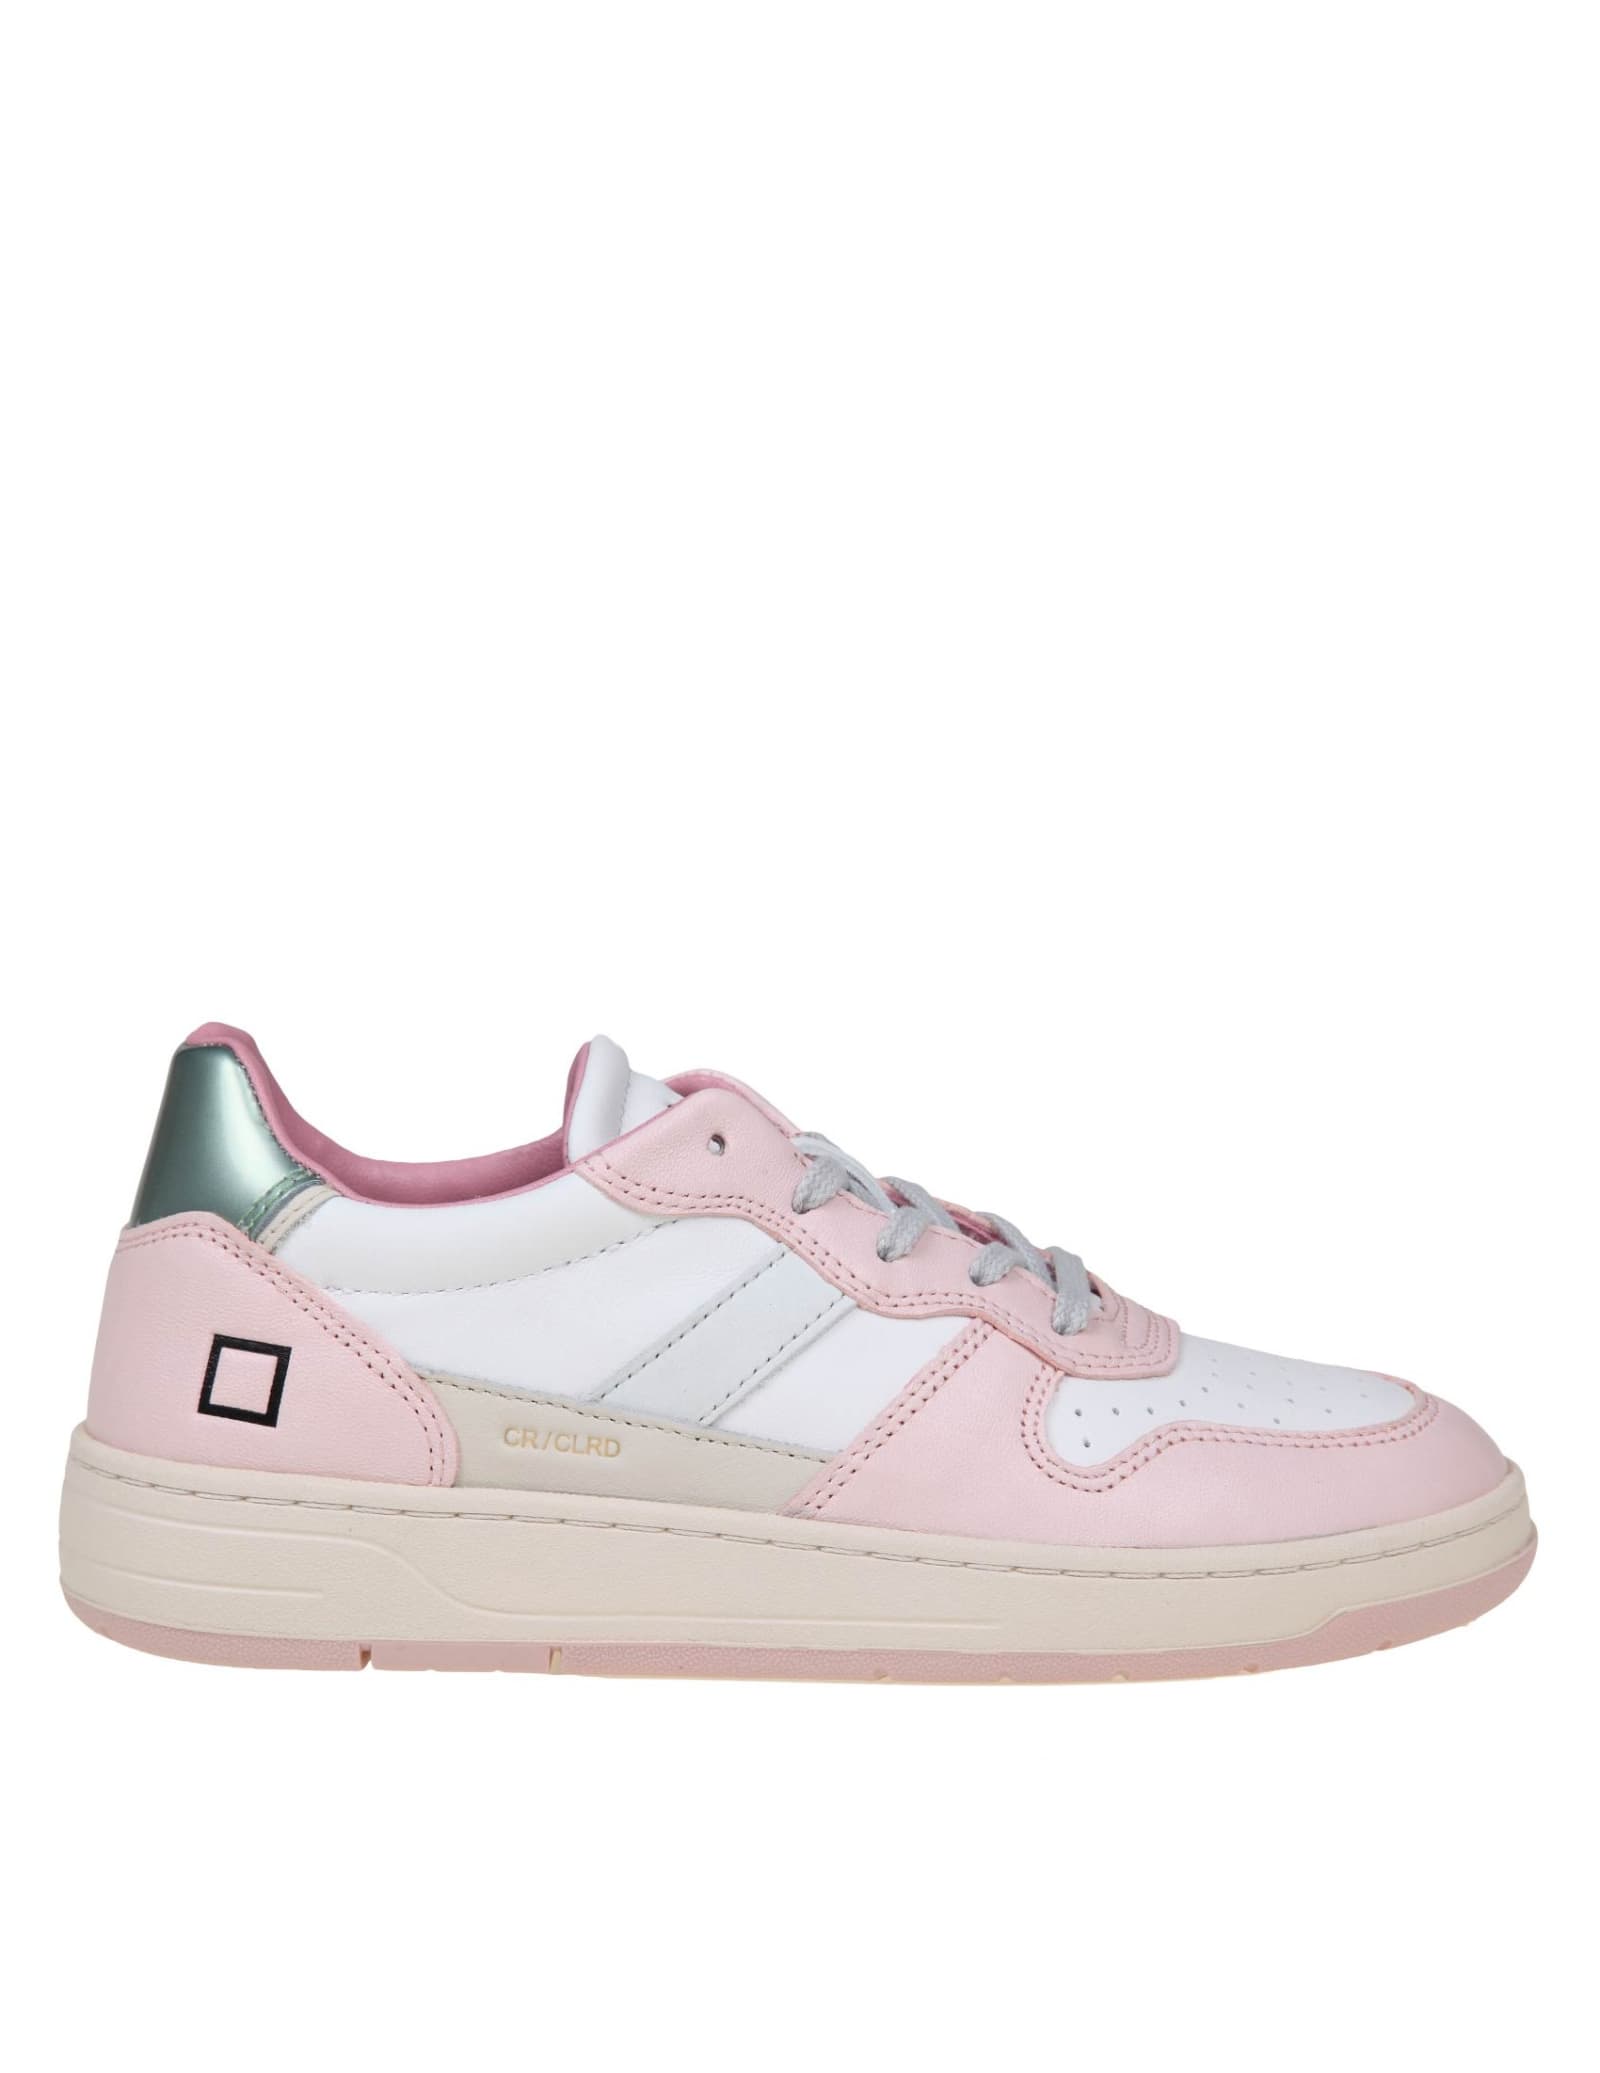 DATE COURT 2.0 SNEAKERS IN WHITE/PINK LEATHER